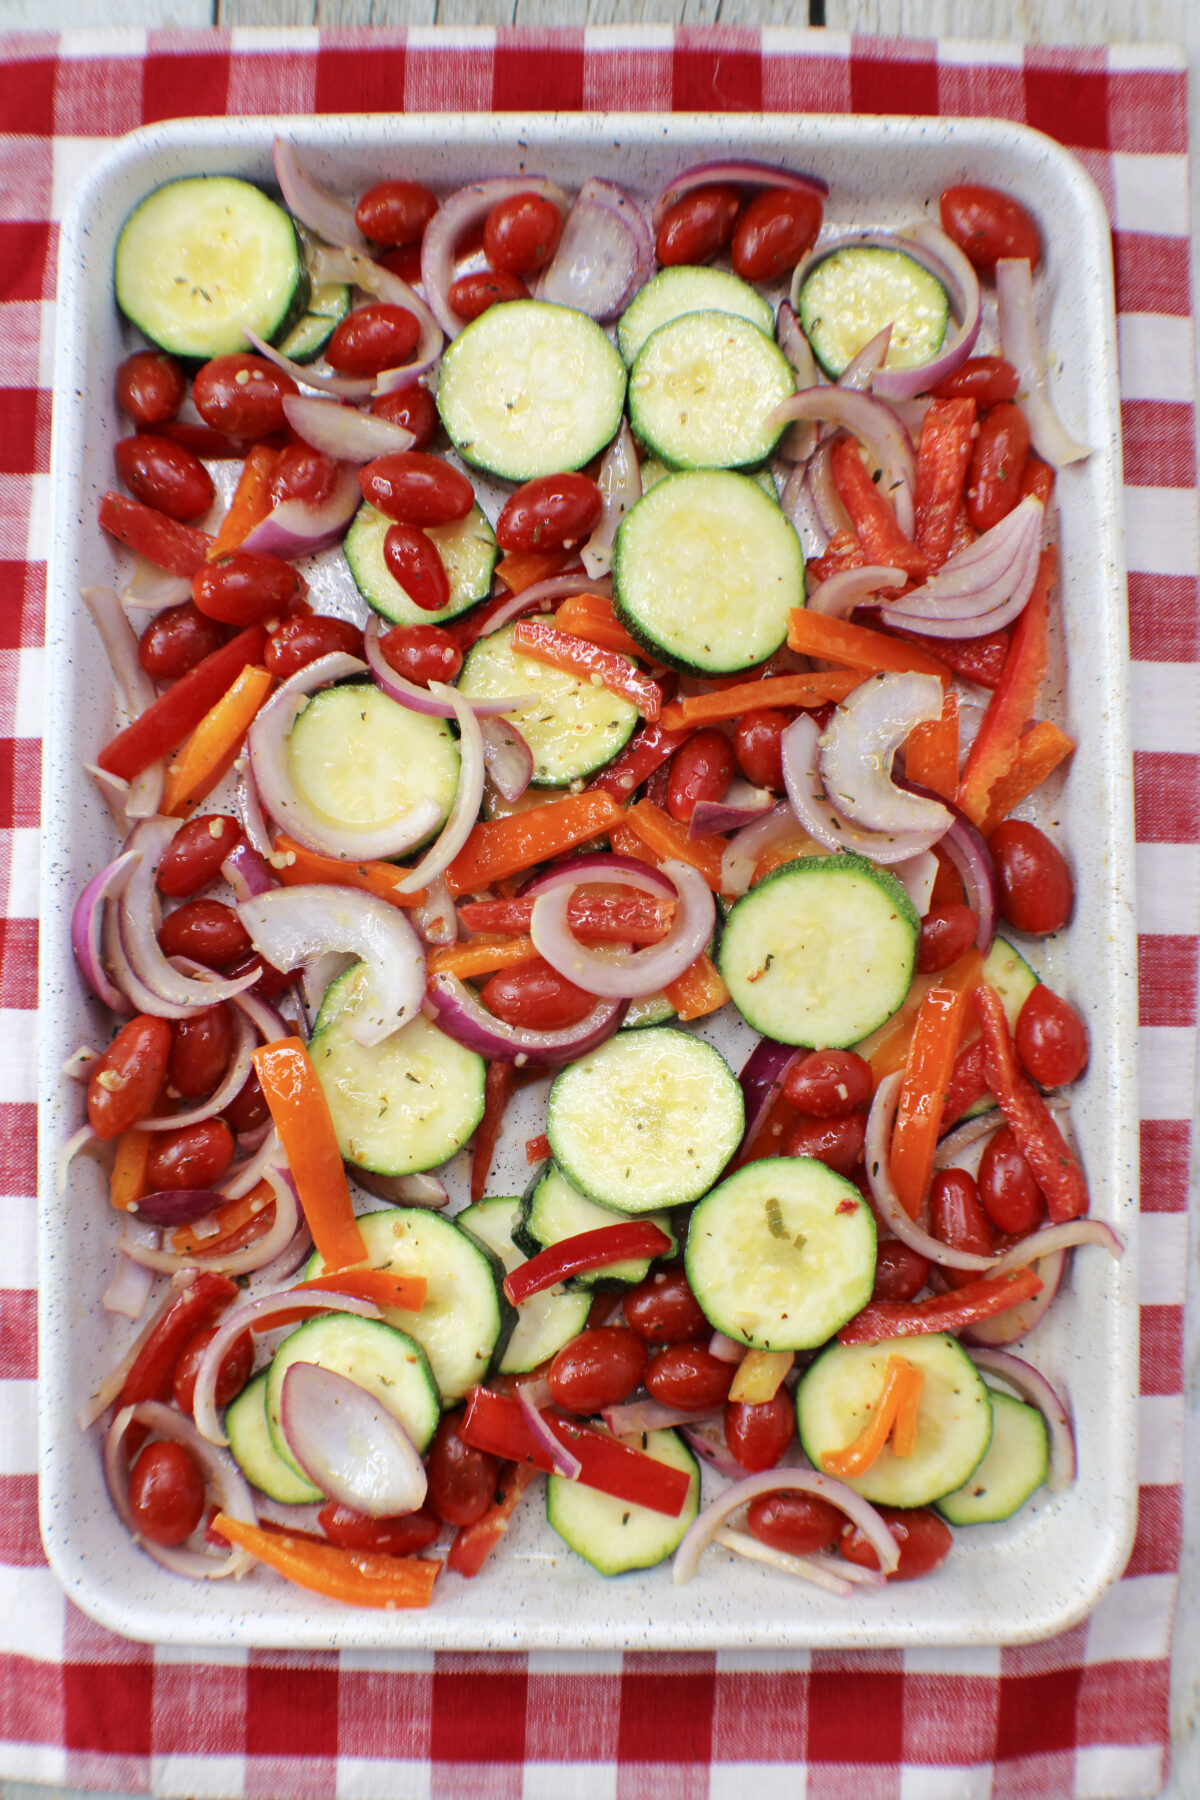 Vegetables seasoned with the marinade.